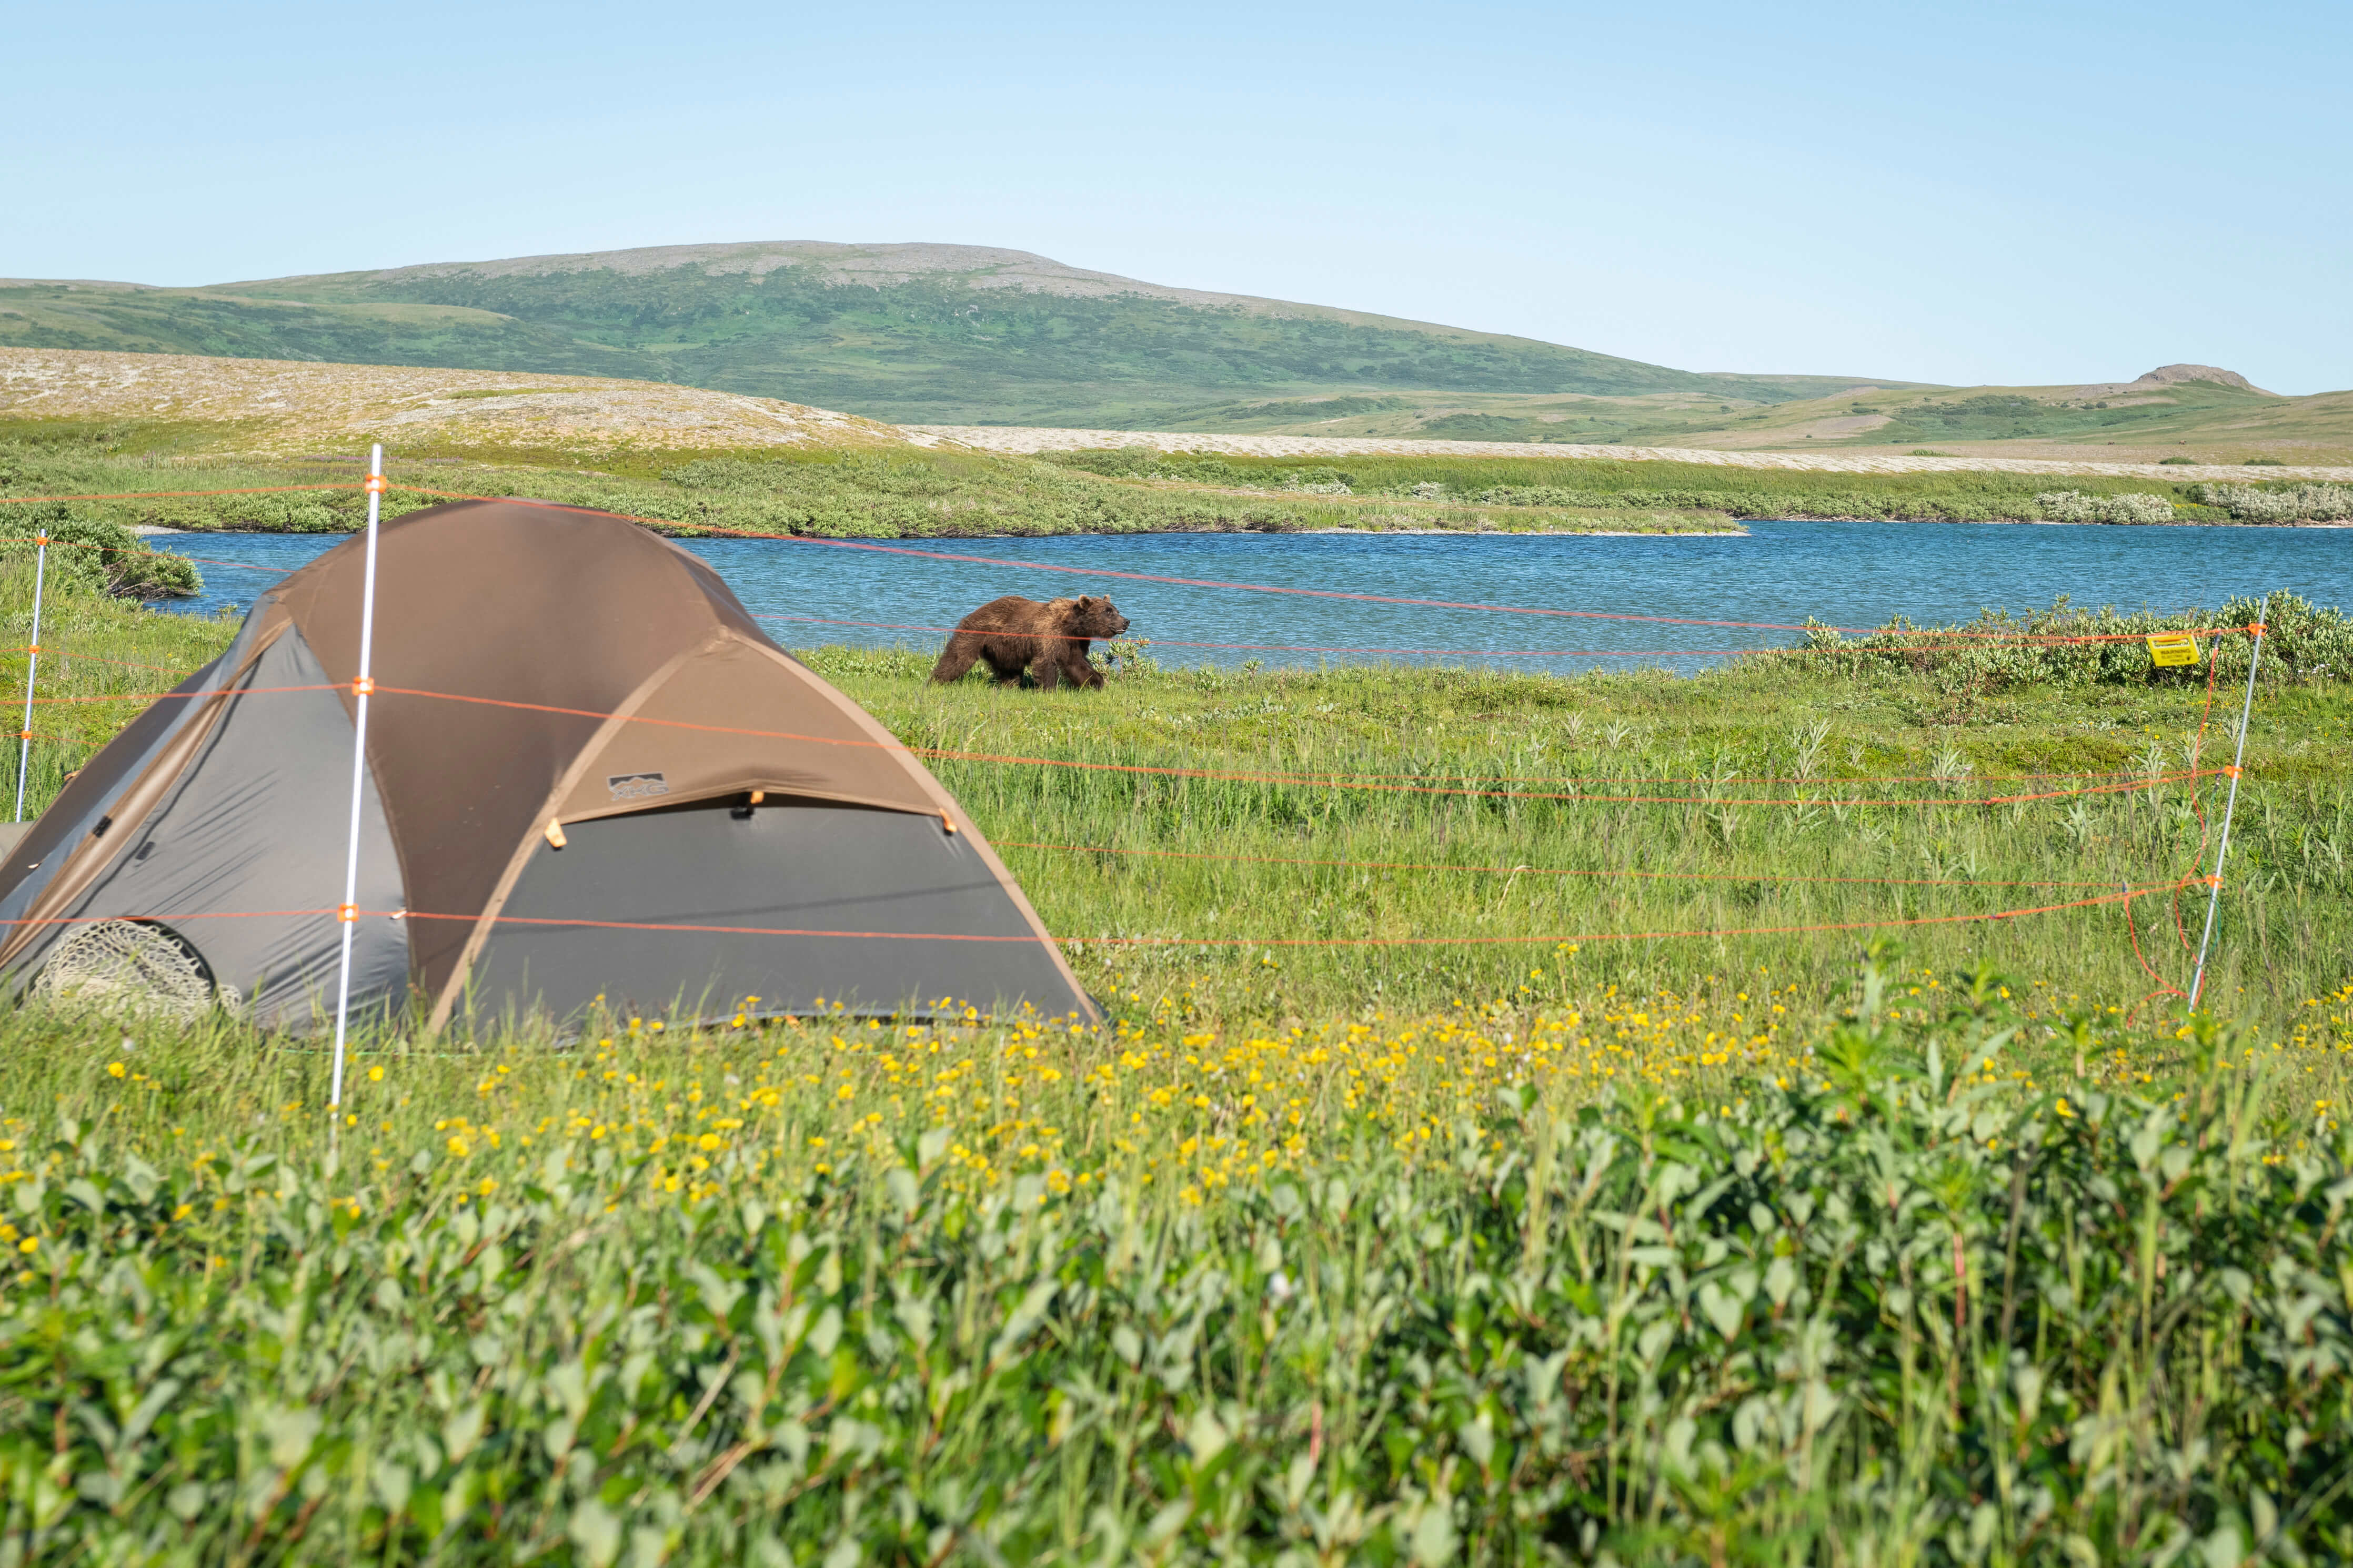 Portable and lightweight electric bear fence set up around a tent in Katmai, Alaska